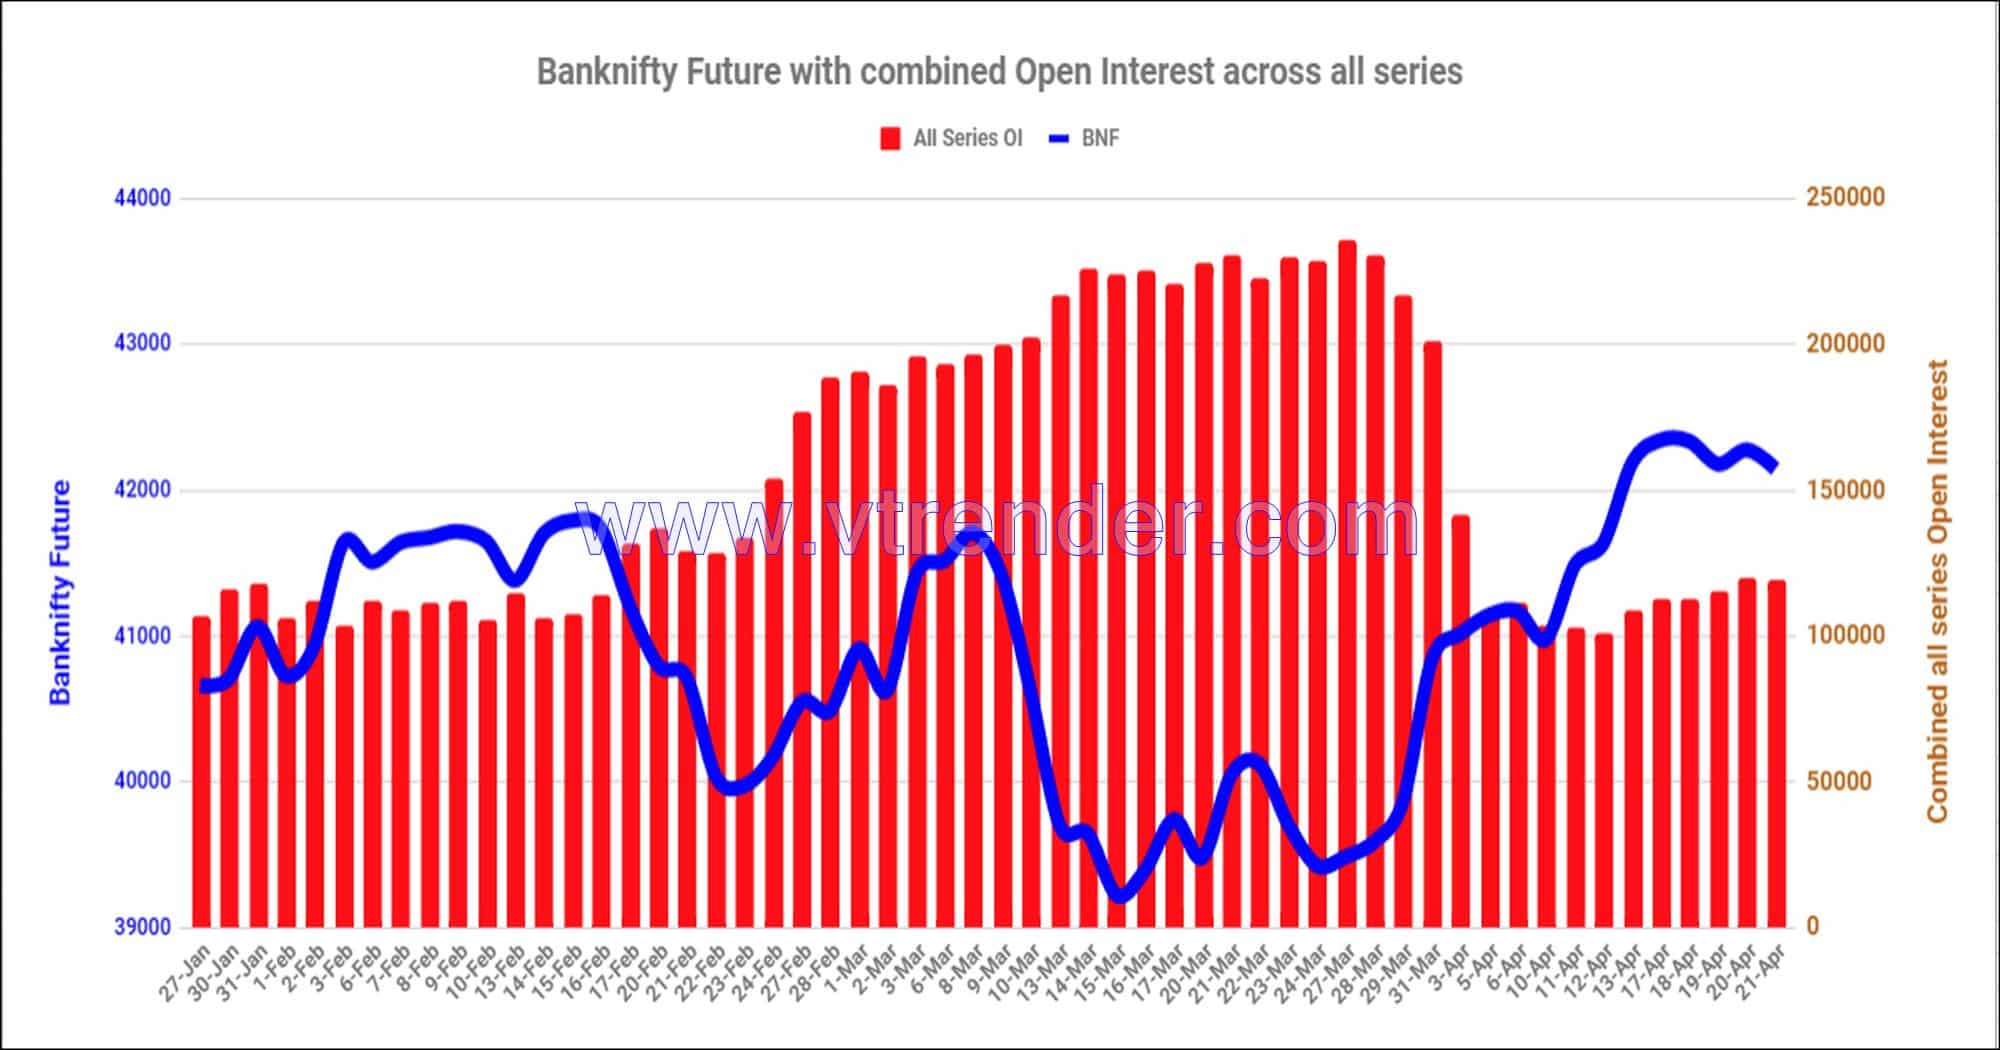 Bnf21Apr Nifty And Banknifty Futures With All Series Combined Open Interest – 21St Apr 2023 Banknifty, Nifty, Open Interest